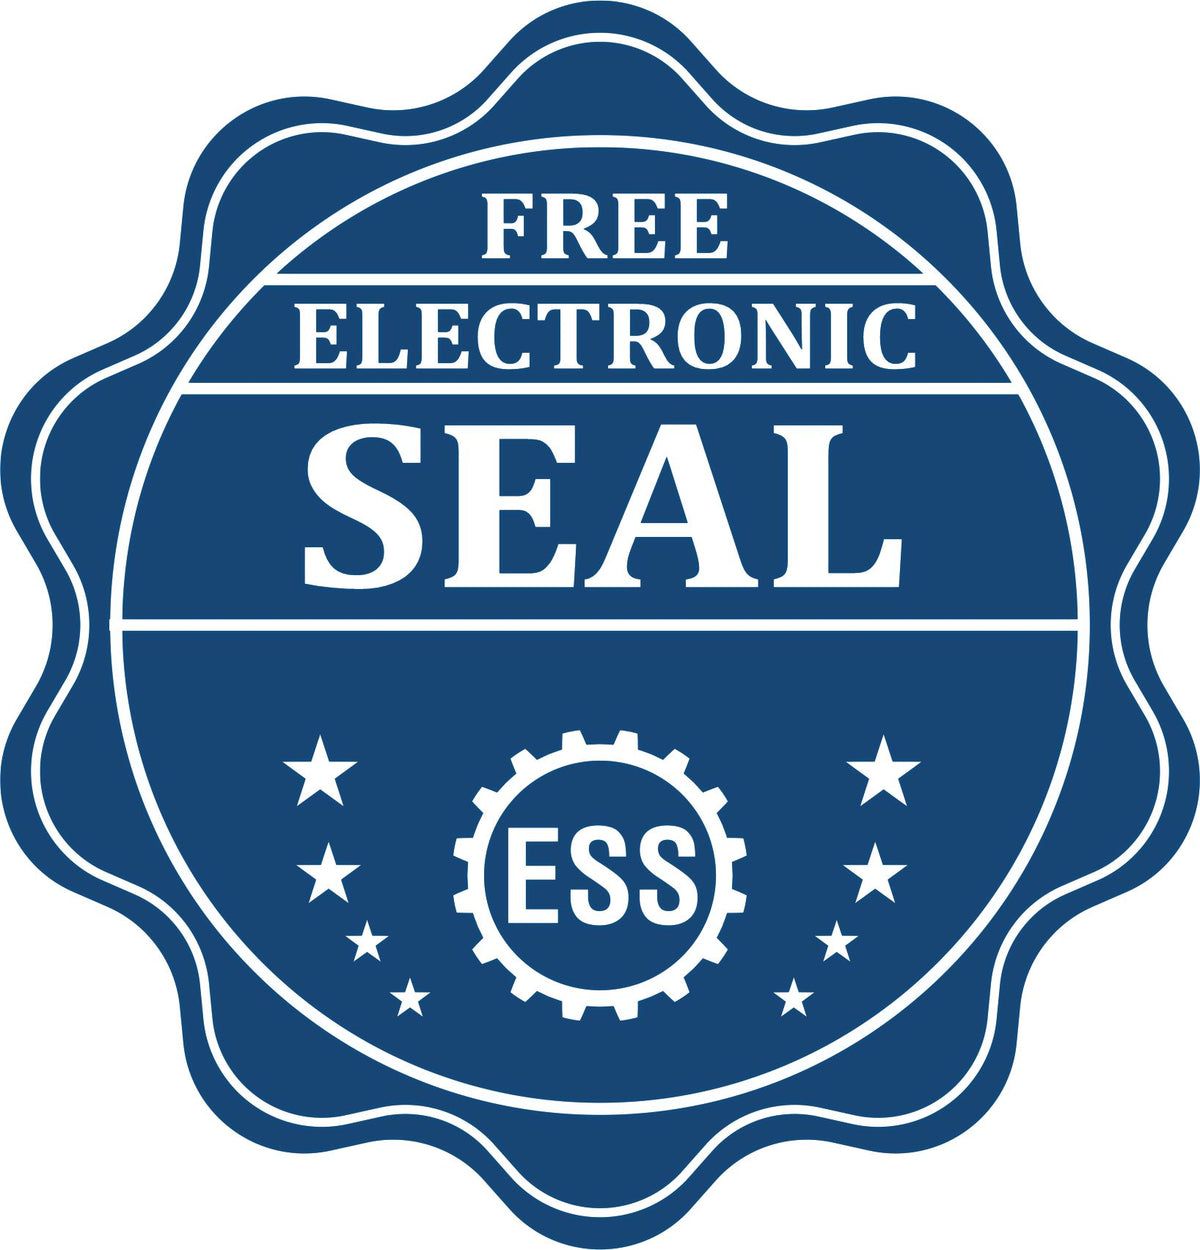 A badge showing a free electronic seal for the Soft Oregon Professional Geologist Seal with stars and the ESS gear on the emblem.